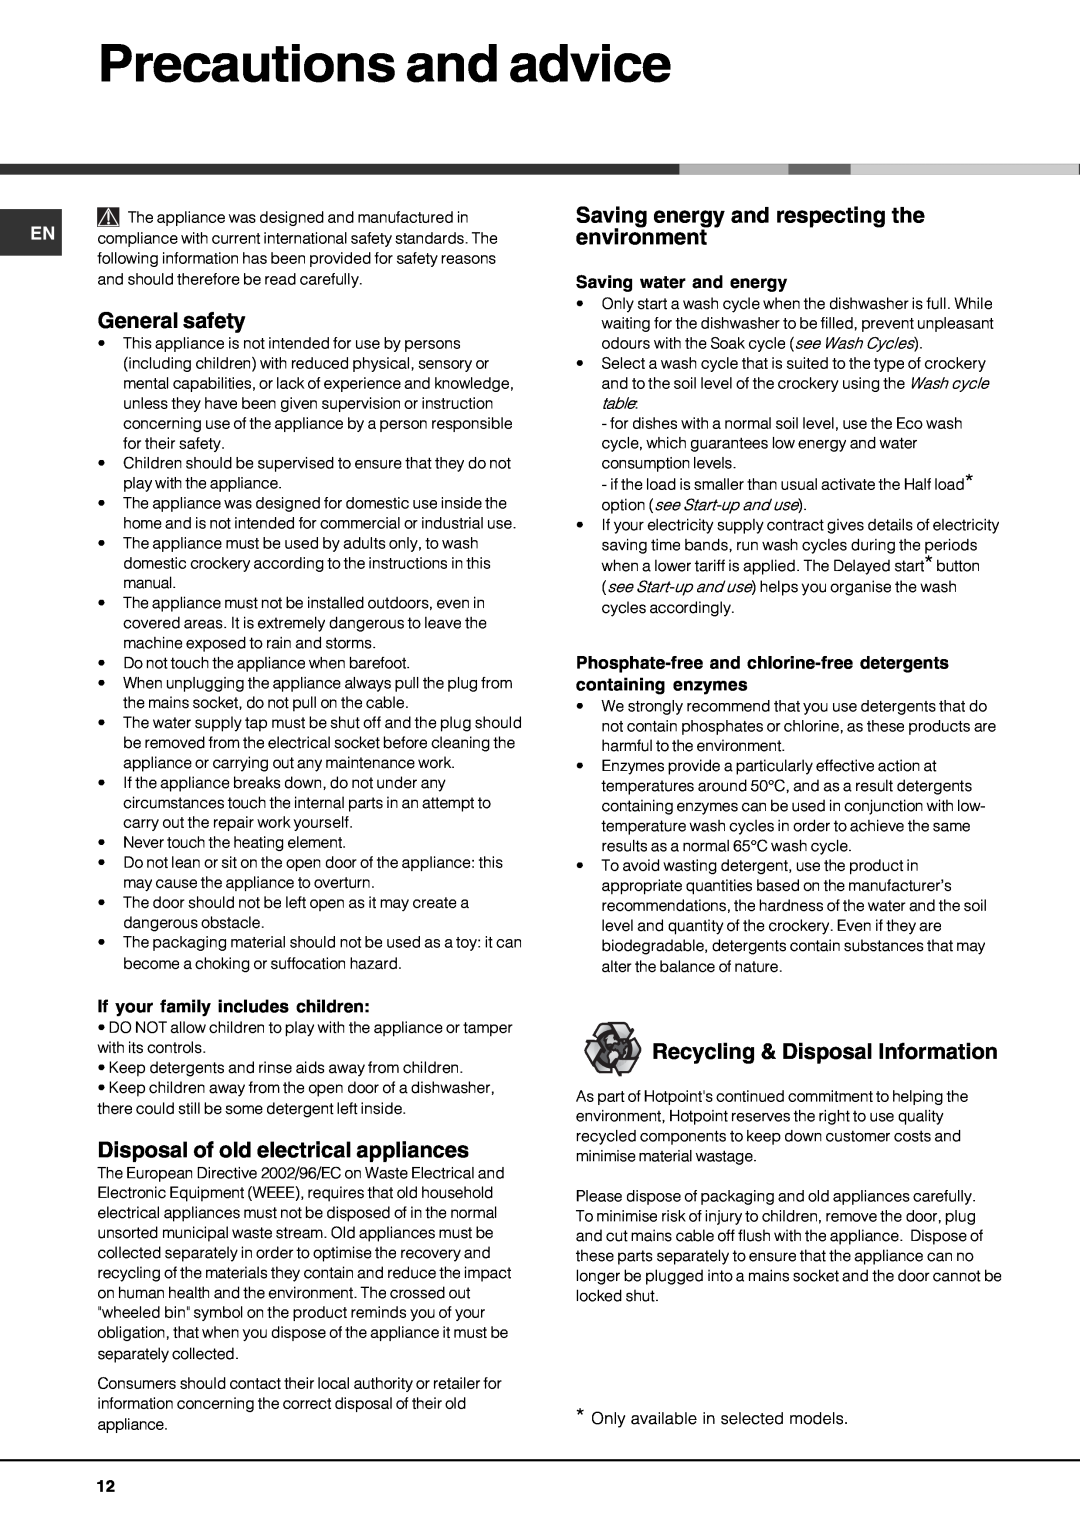 Hotpoint FDM550PR manual Precautions and advice, General safety, Saving energy and respecting the environment 